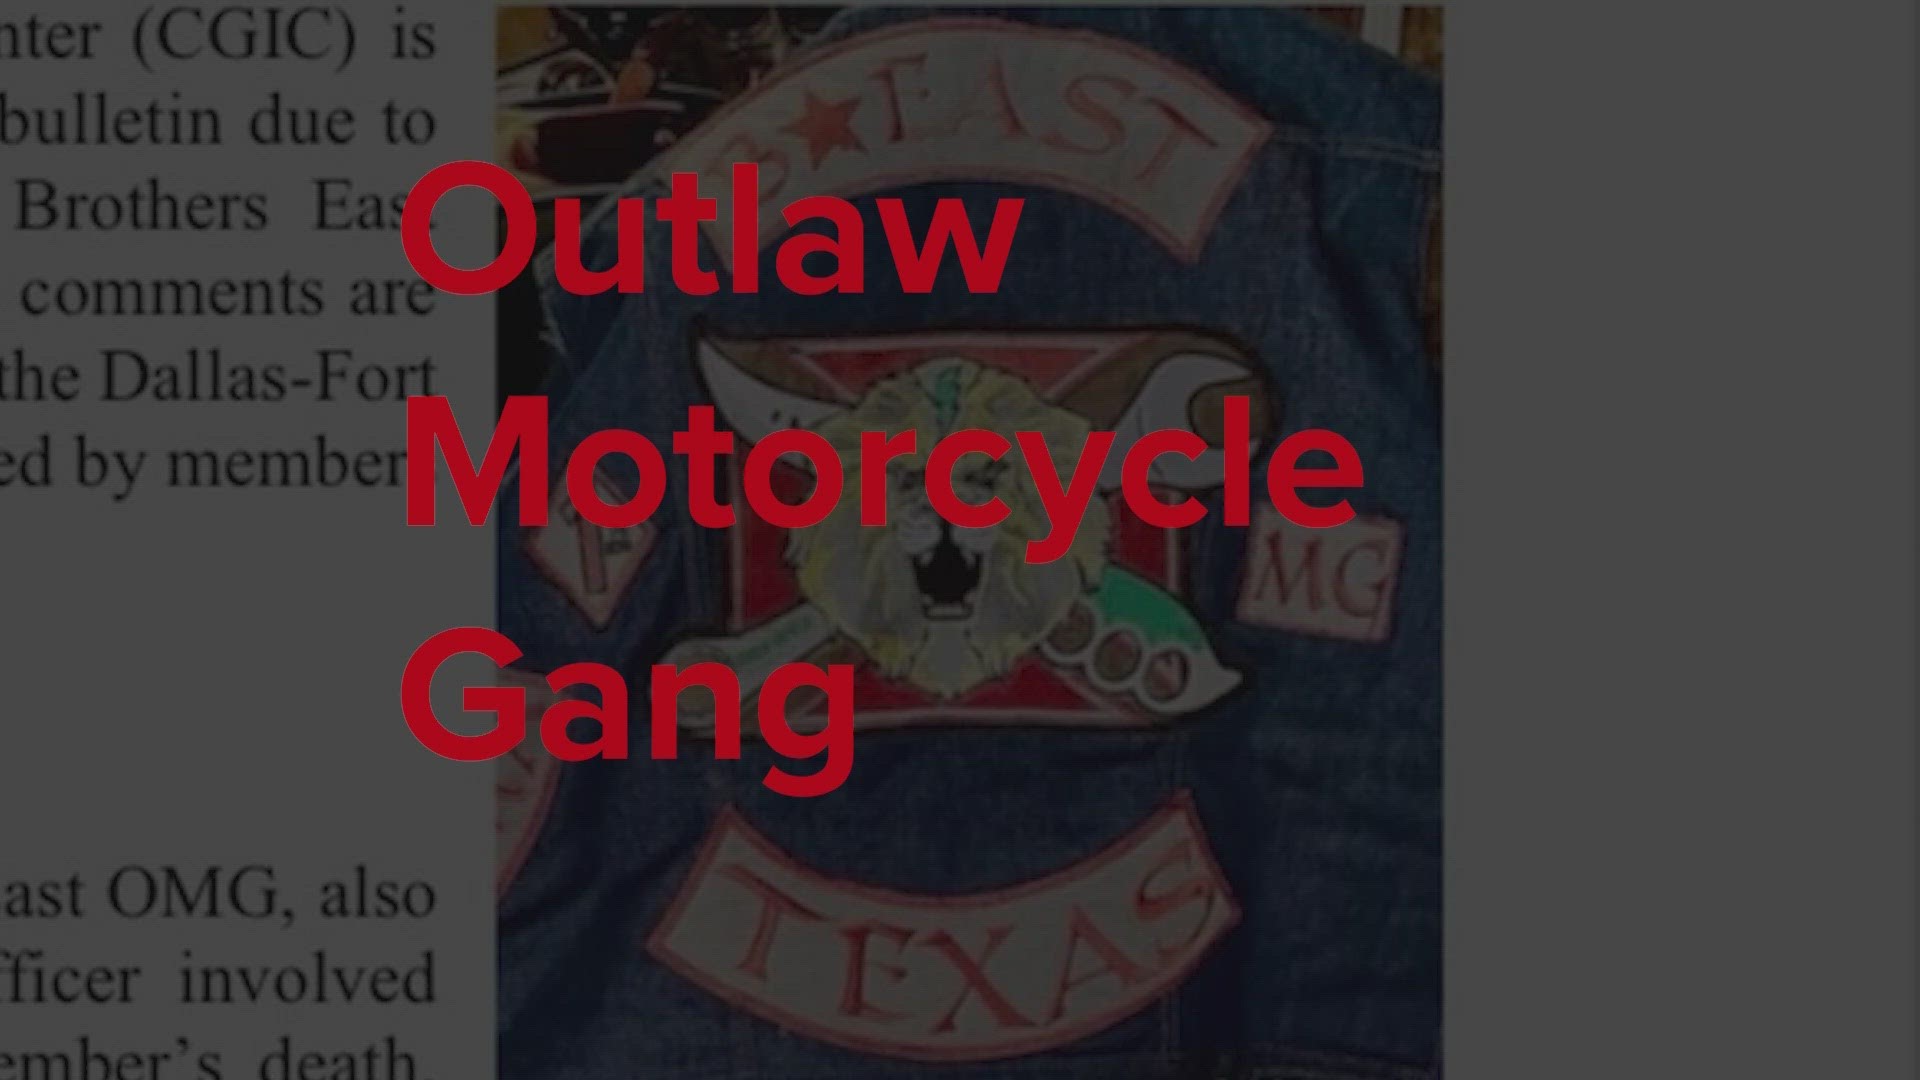 Per the bulletin, a victim who died at the hands of police belonged to a known biker gang that has been making anti-law enforcement posts online since the shooting.